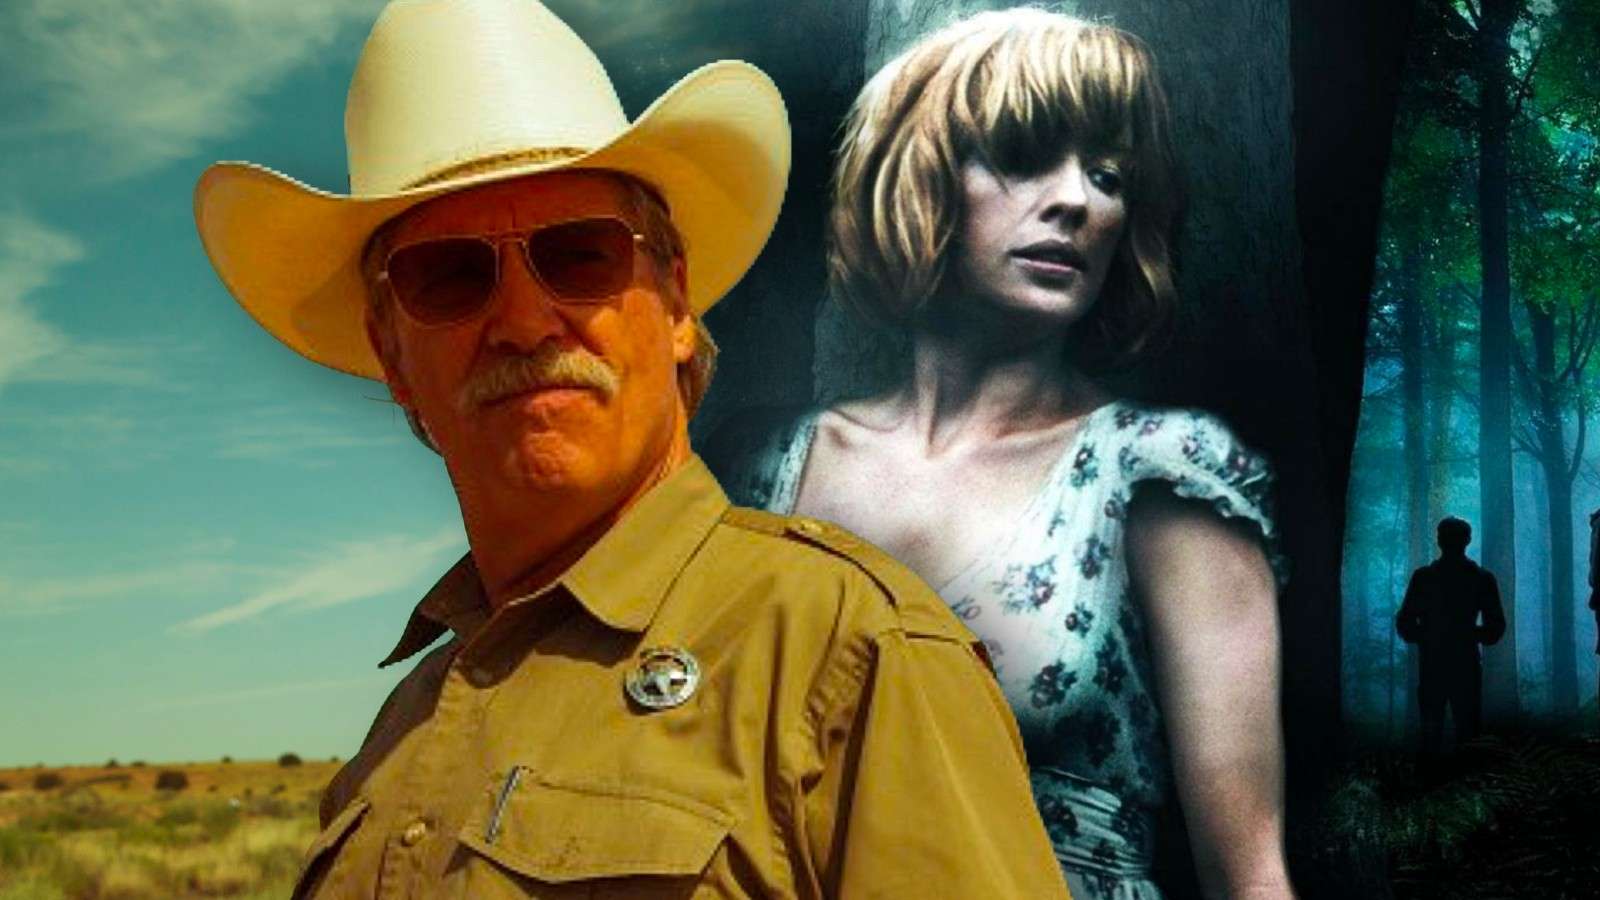 Jeff Bridges in Hell or High Water and Kelly Reilly in Eden Lake